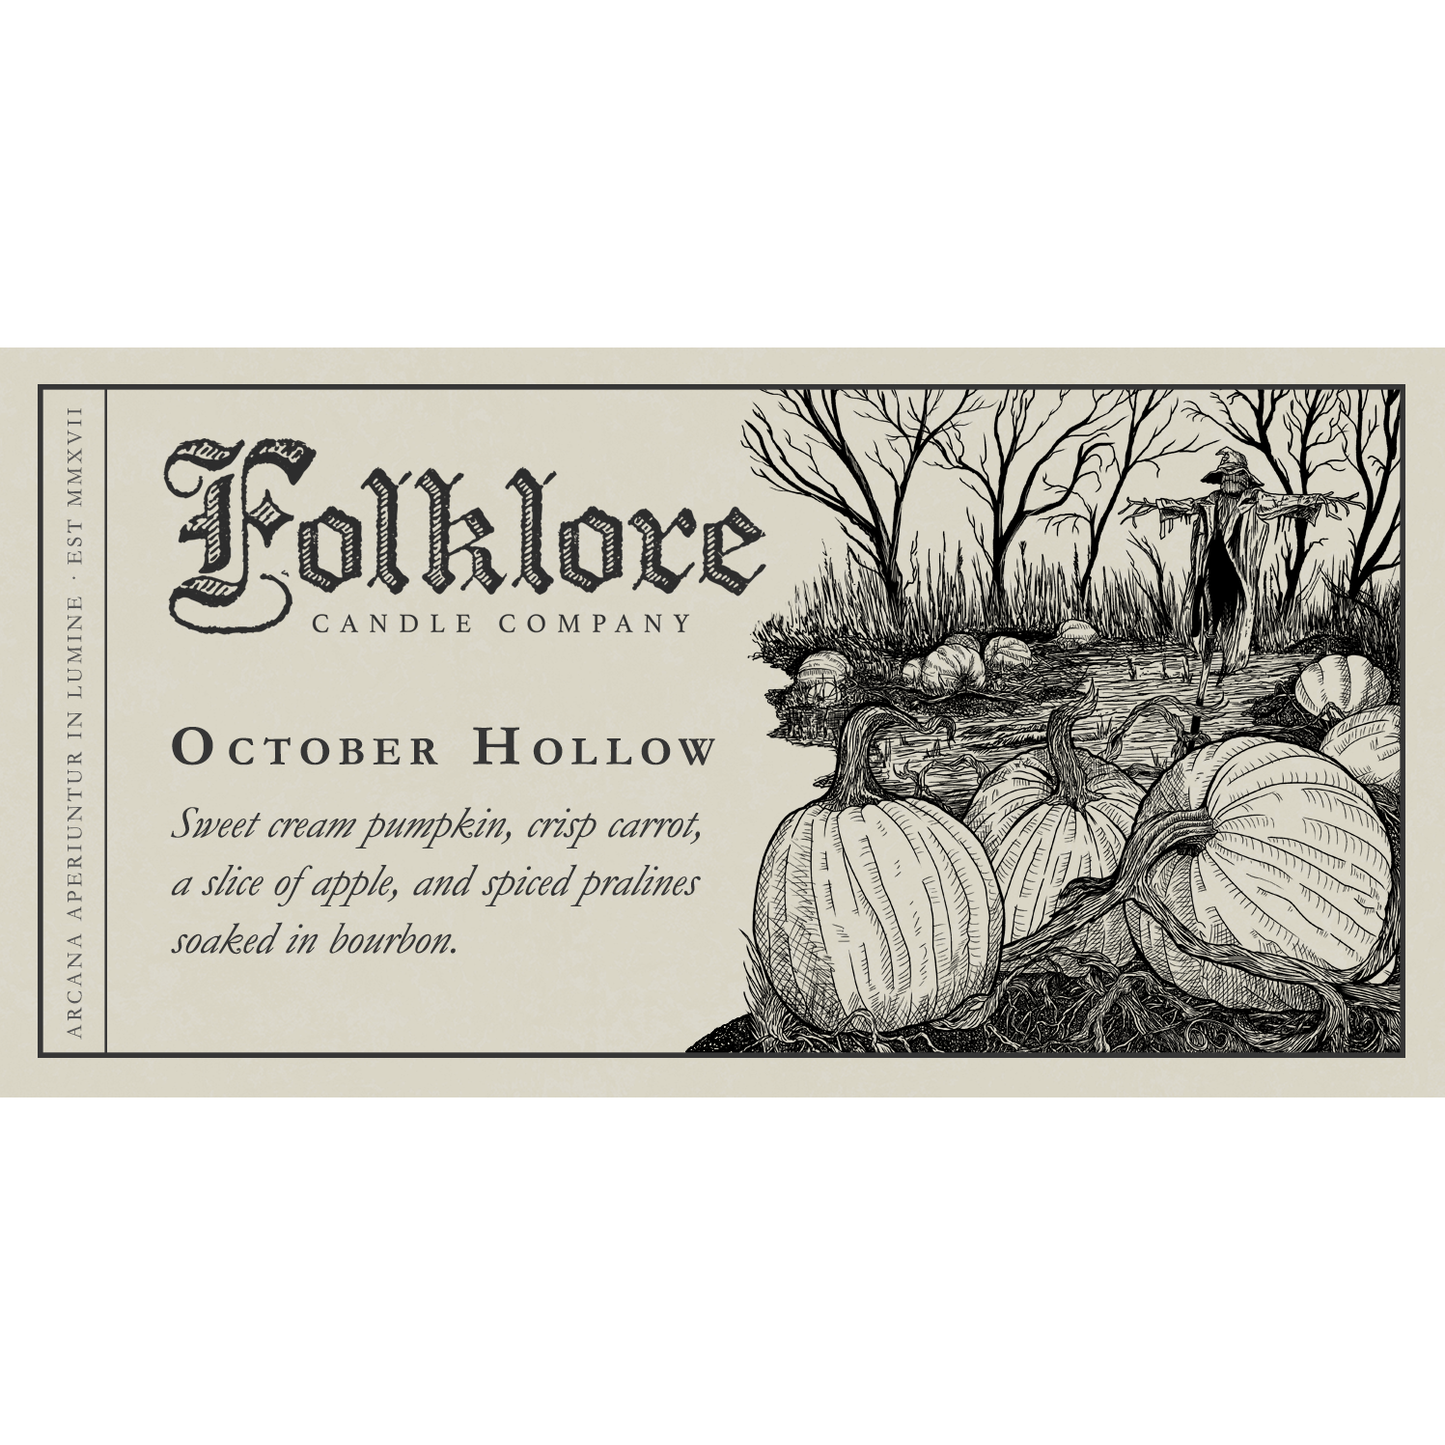 Luminary Emporium -October Hollow Soy Candle by Folklore Candle Co